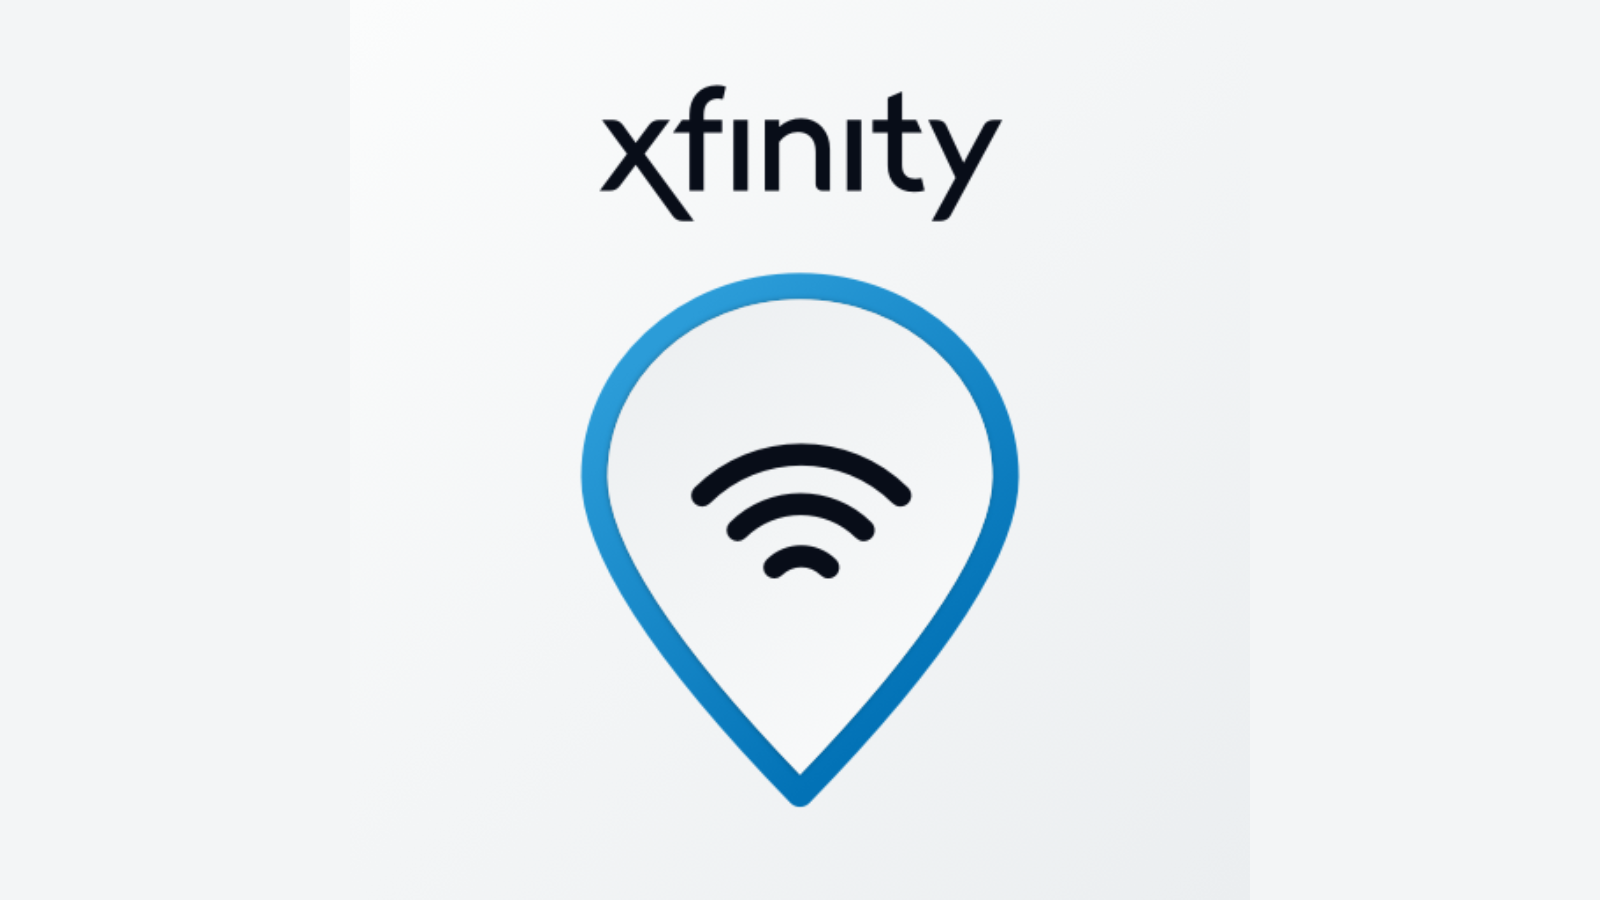 Comcast Opens Free Xfinity WiFi Hotspots to Support Residents During Recent Storms